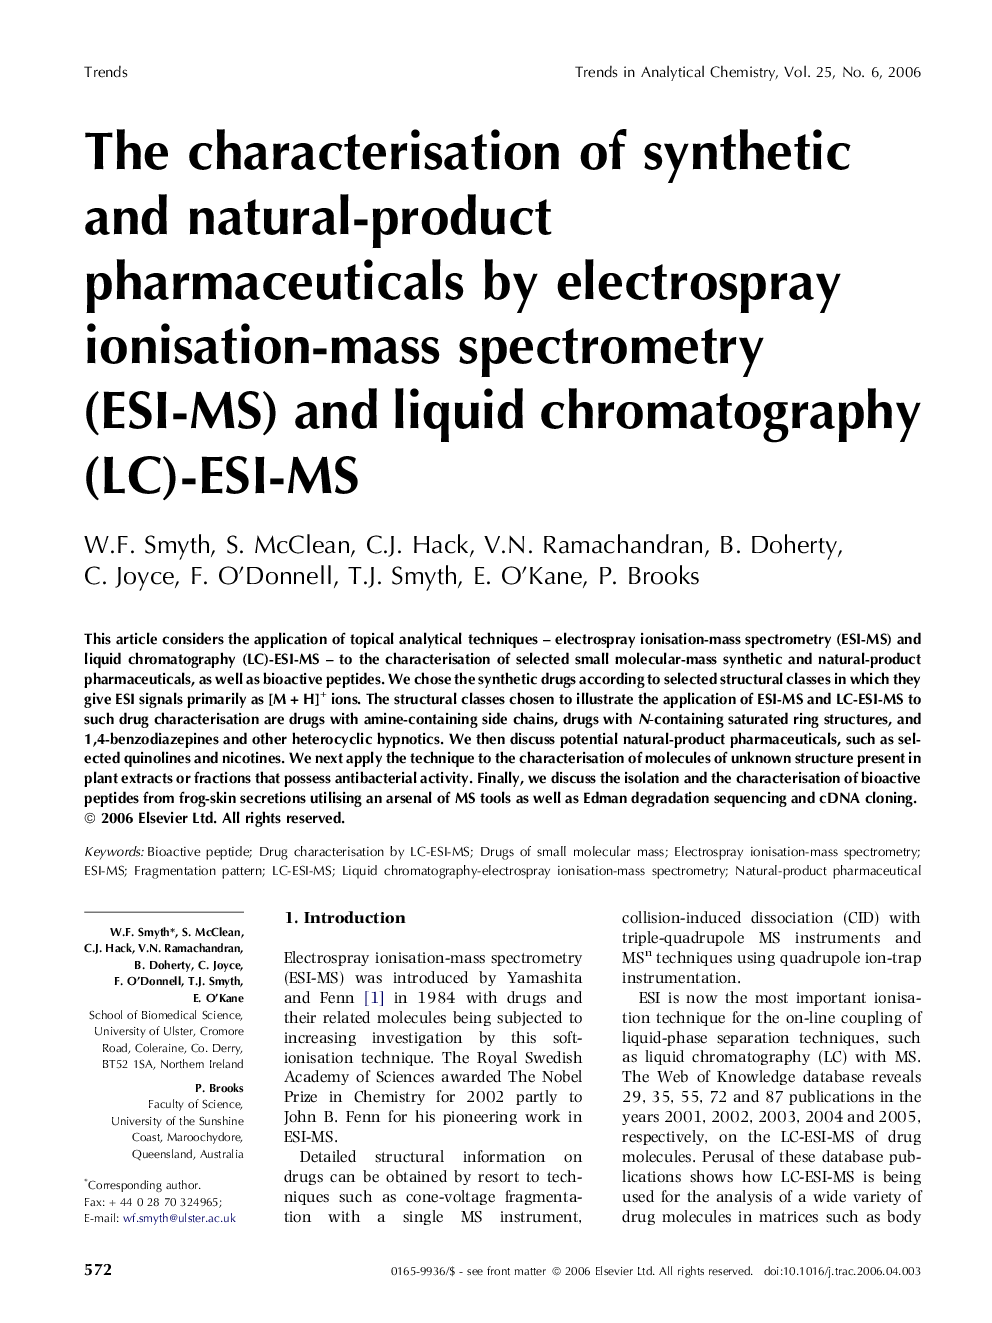 The characterisation of synthetic and natural-product pharmaceuticals by electrospray ionisation-mass spectrometry (ESI-MS) and liquid chromatography (LC)-ESI-MS